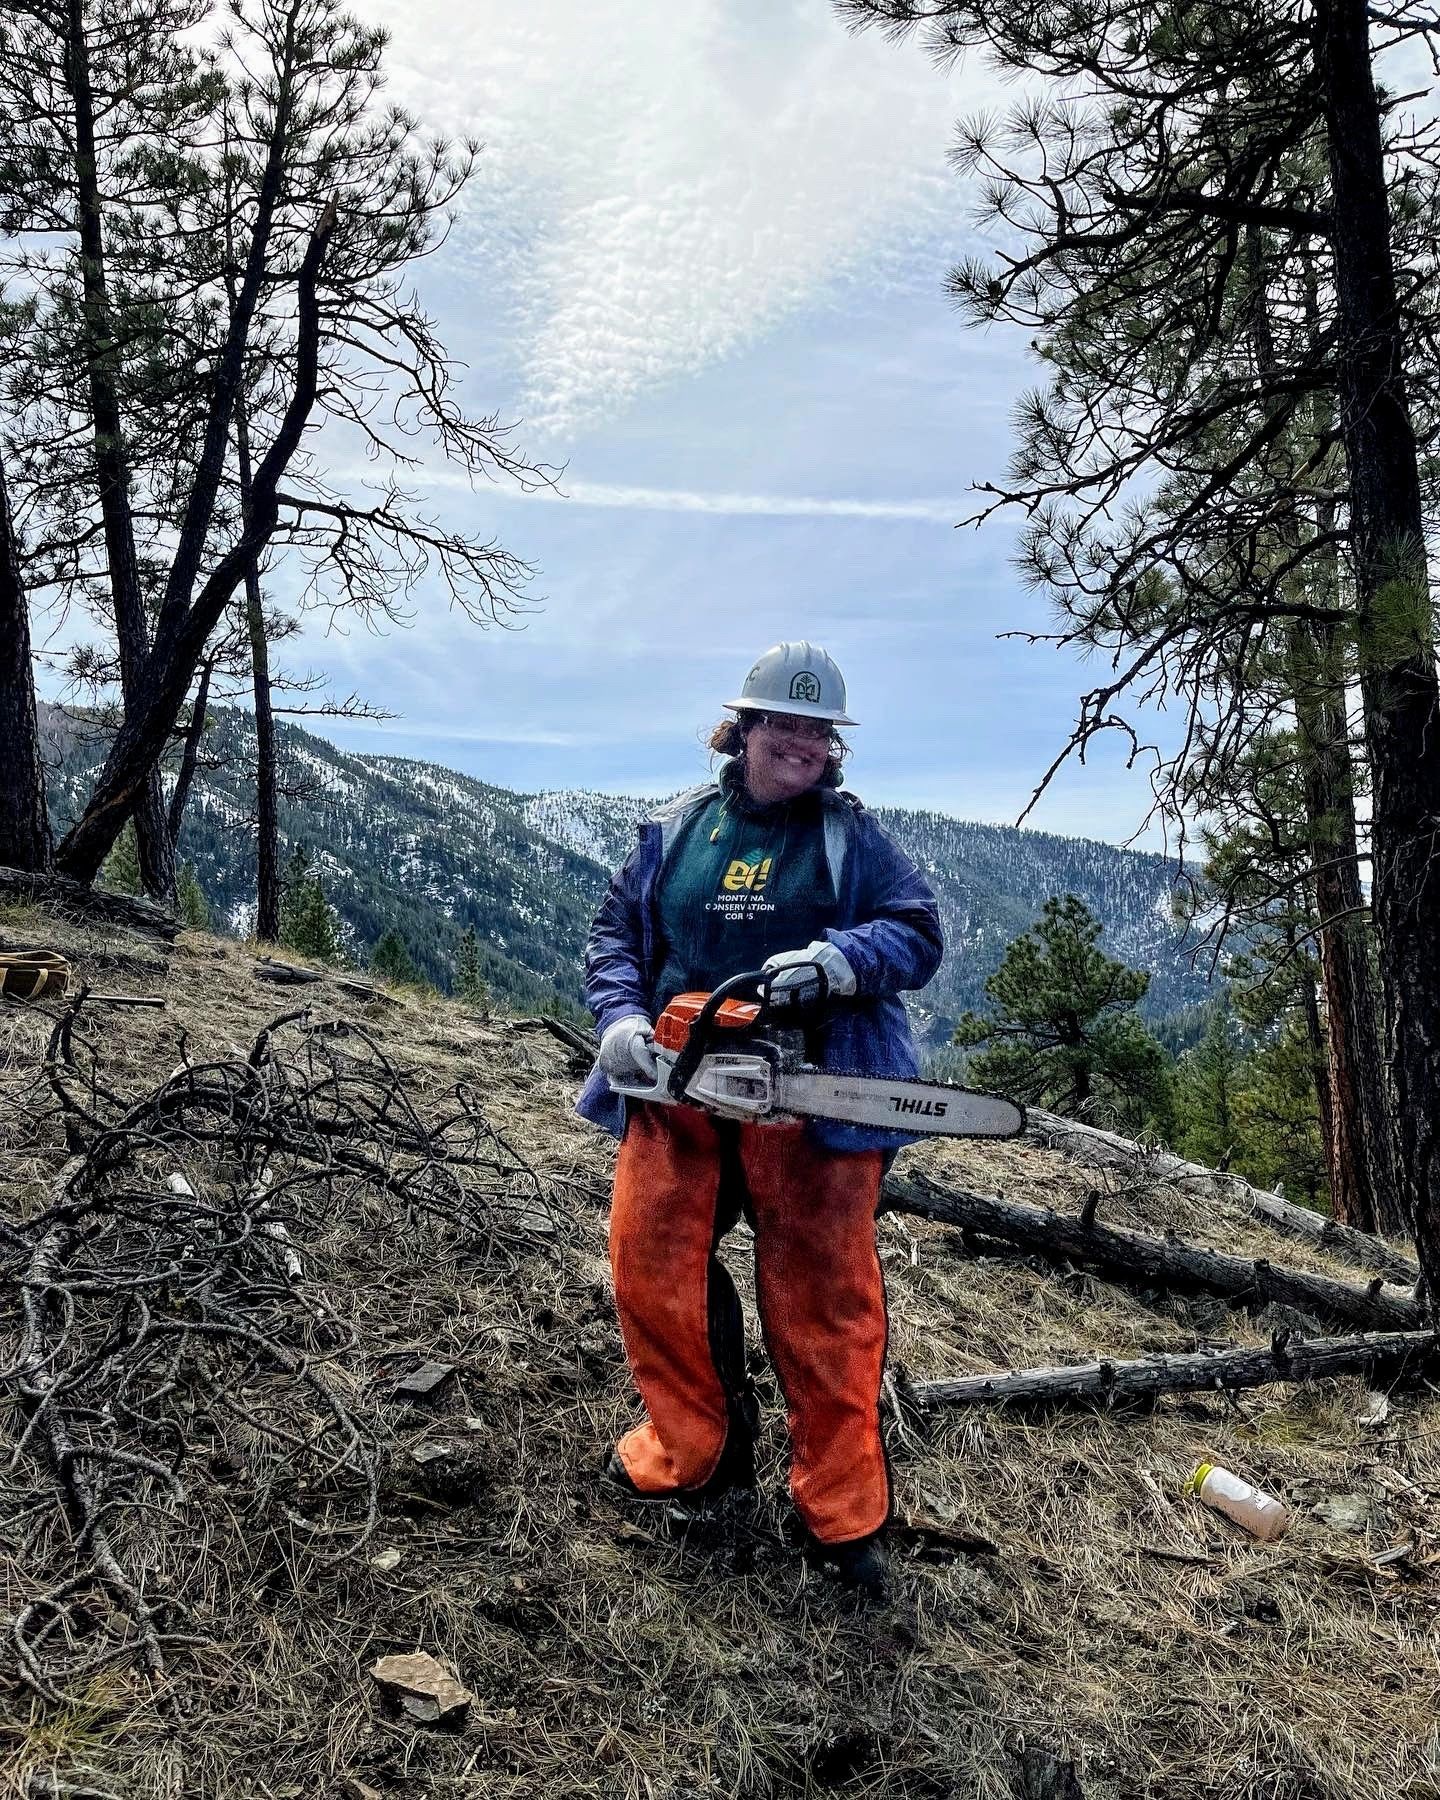 A youth leader strands in a clearing surrounded by trees, with snow capped mountains in the background. They are holding a chainsaw while wearing chaps and a helmet.